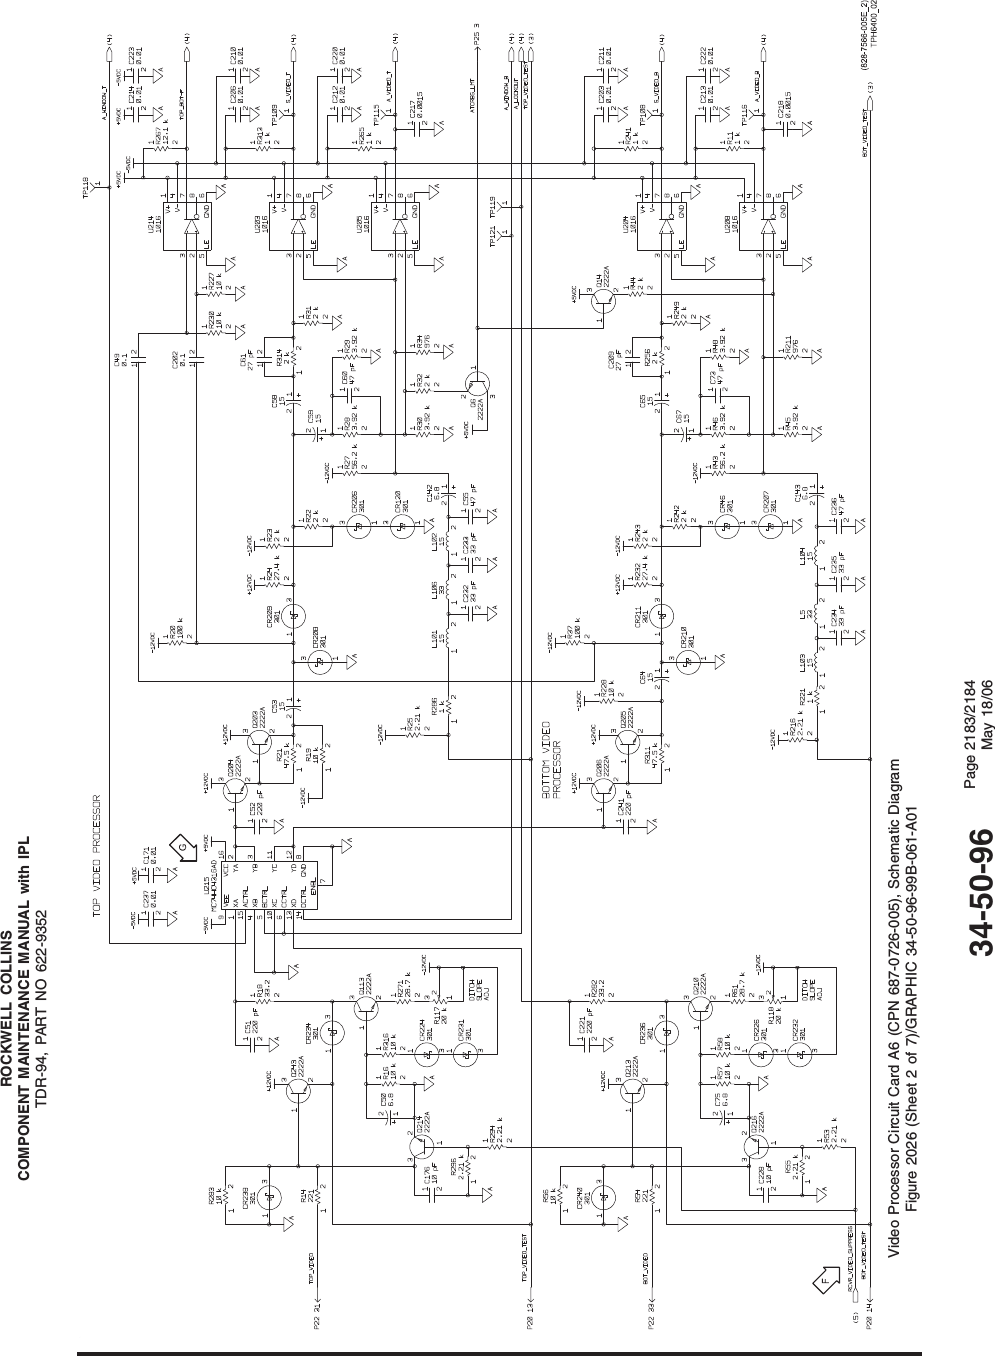 ROCKWELL COLLINSCOMPONENT MAINTENANCE MANUAL with IPLTDR-94, PART NO 622-9352Video Processor Circuit Card A6 (CPN 687-0726-005), Schematic DiagramFigure 2026 (Sheet 2 of 7)/GRAPHIC 34-50-96-99B-061-A0134-50-96 Page 2183/2184May 18/06